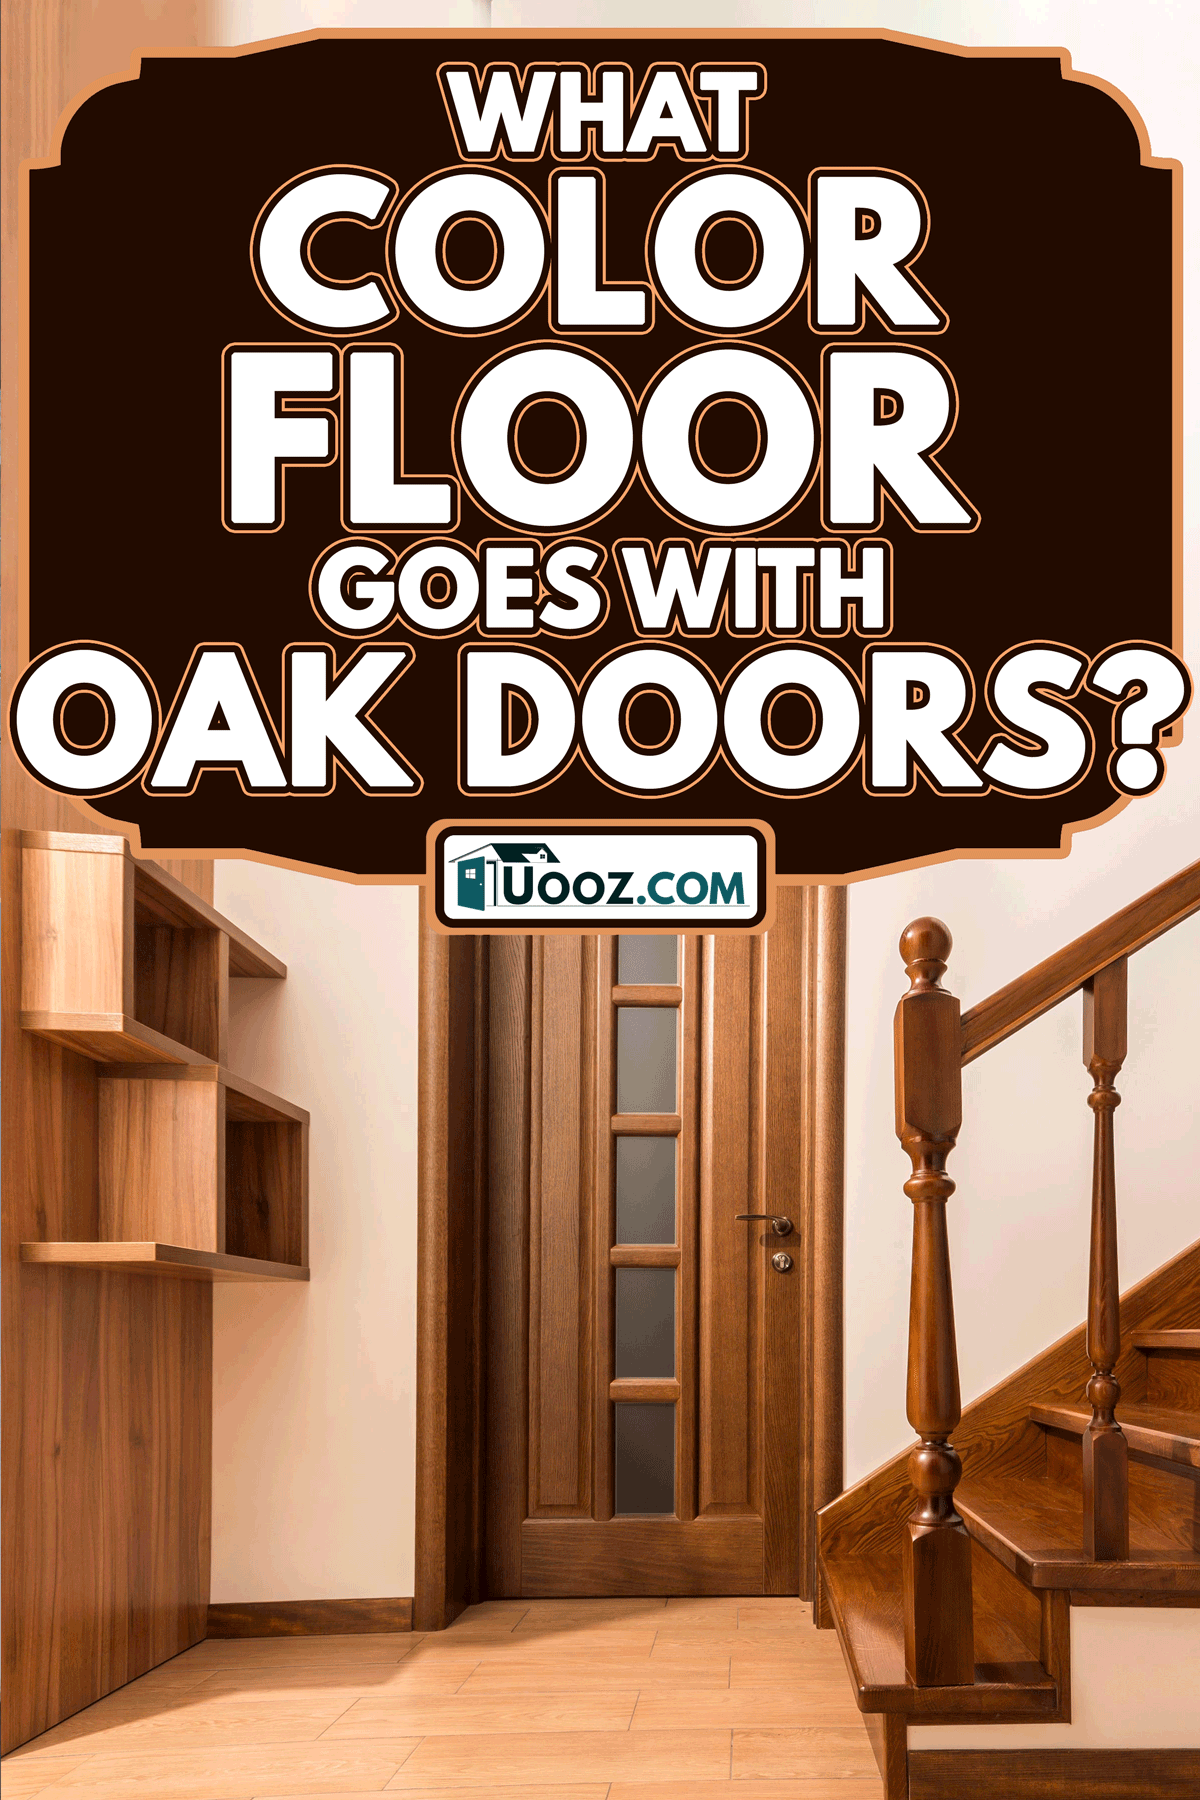 Modern brown oak wooden stairs and doors in new renovated house, What Color Floor Goes With Oak Doors?